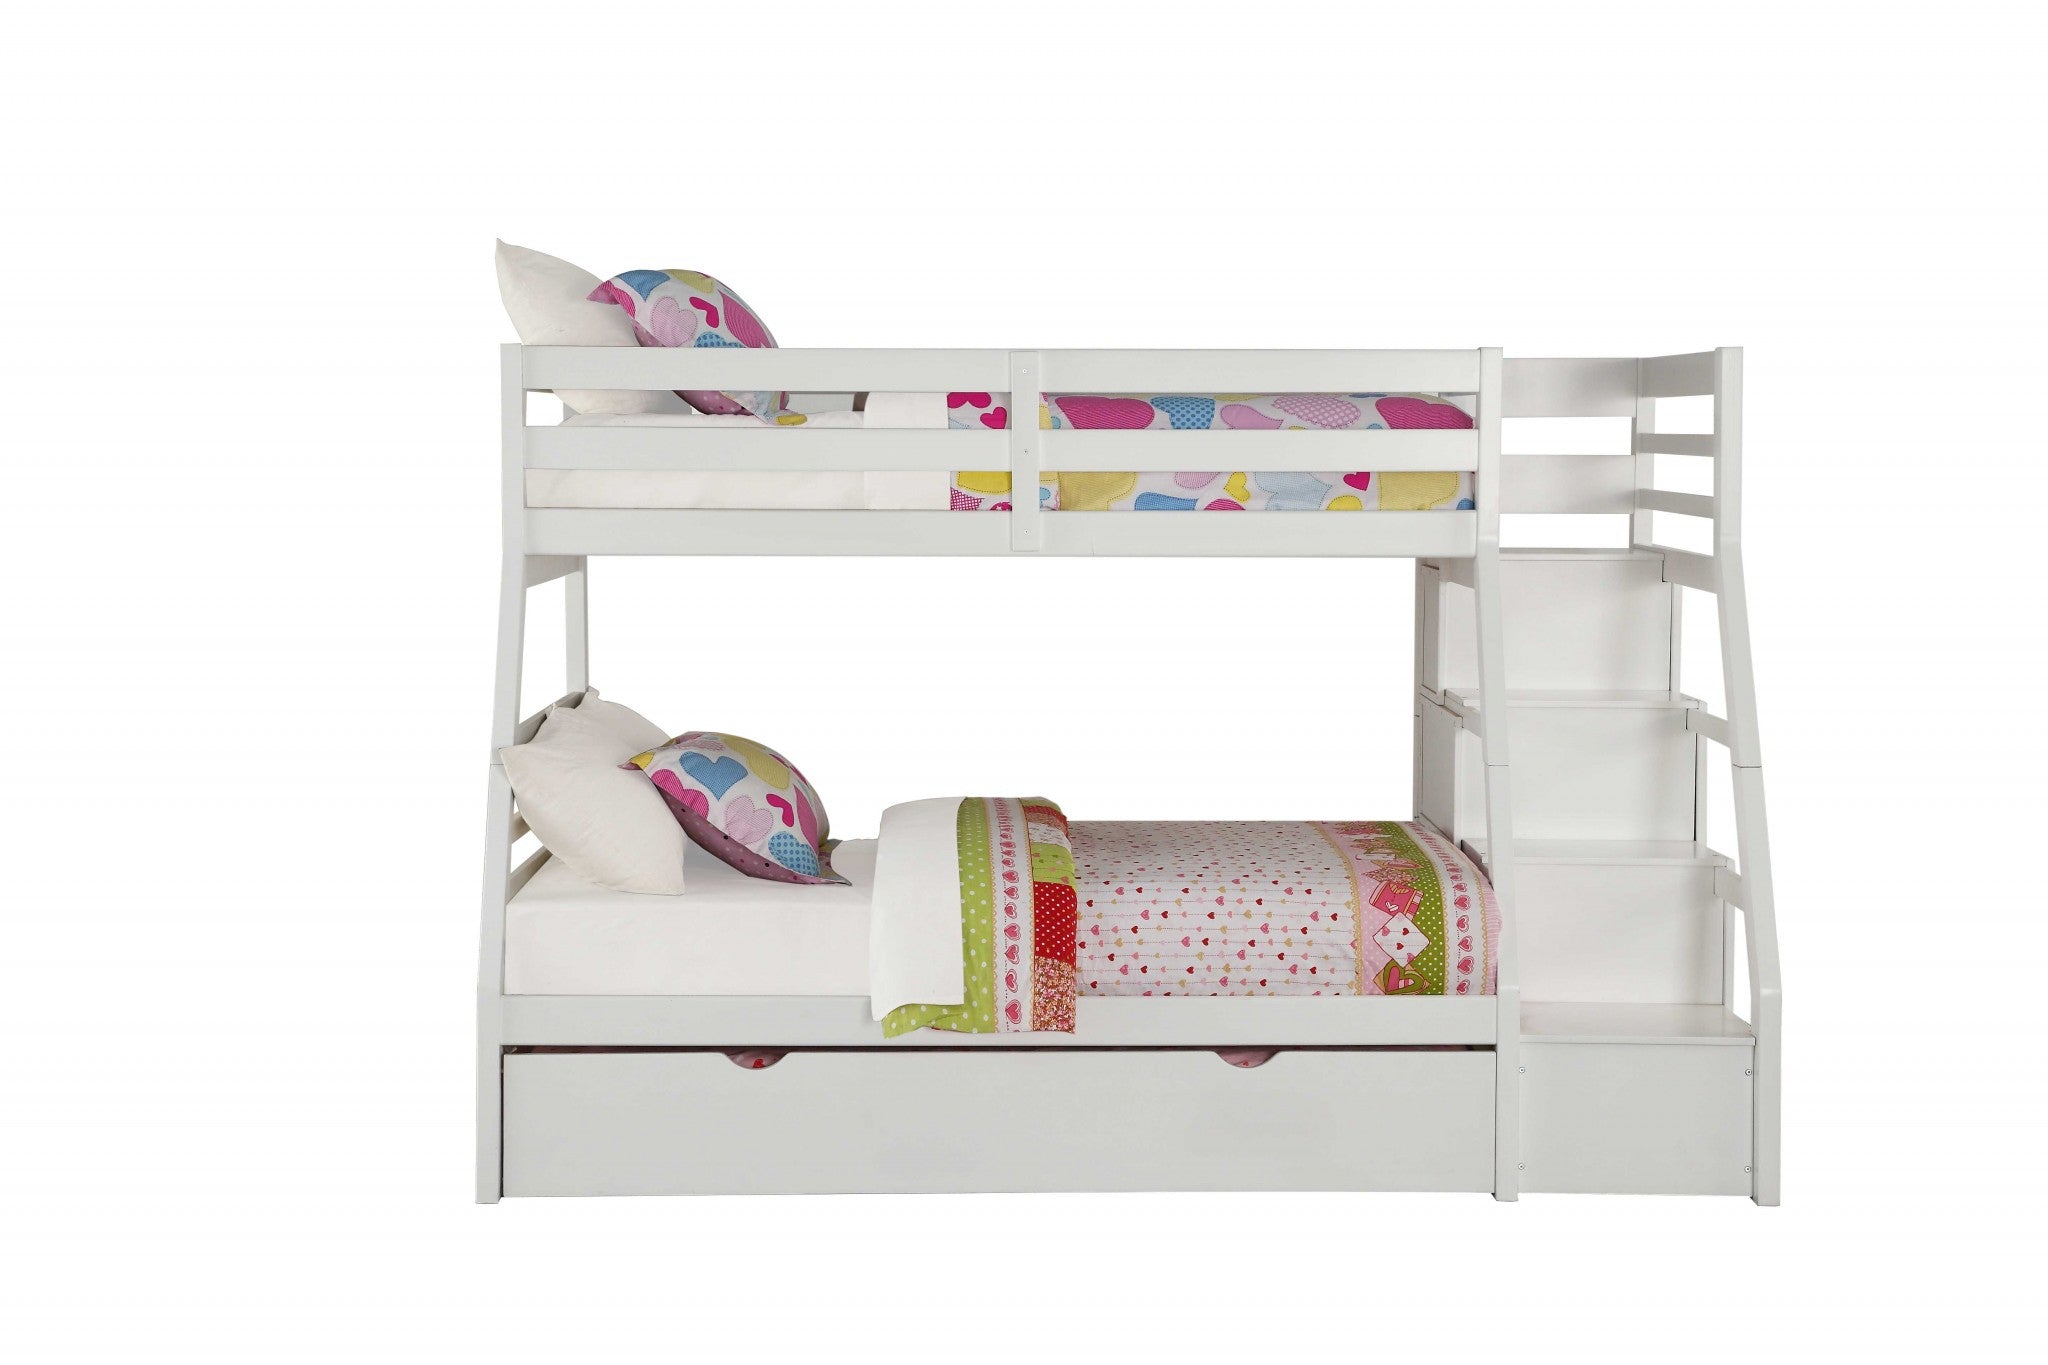 95" X 56" X 65" Twin Over Full White Storage Ladder And Trundle Bunk Bed